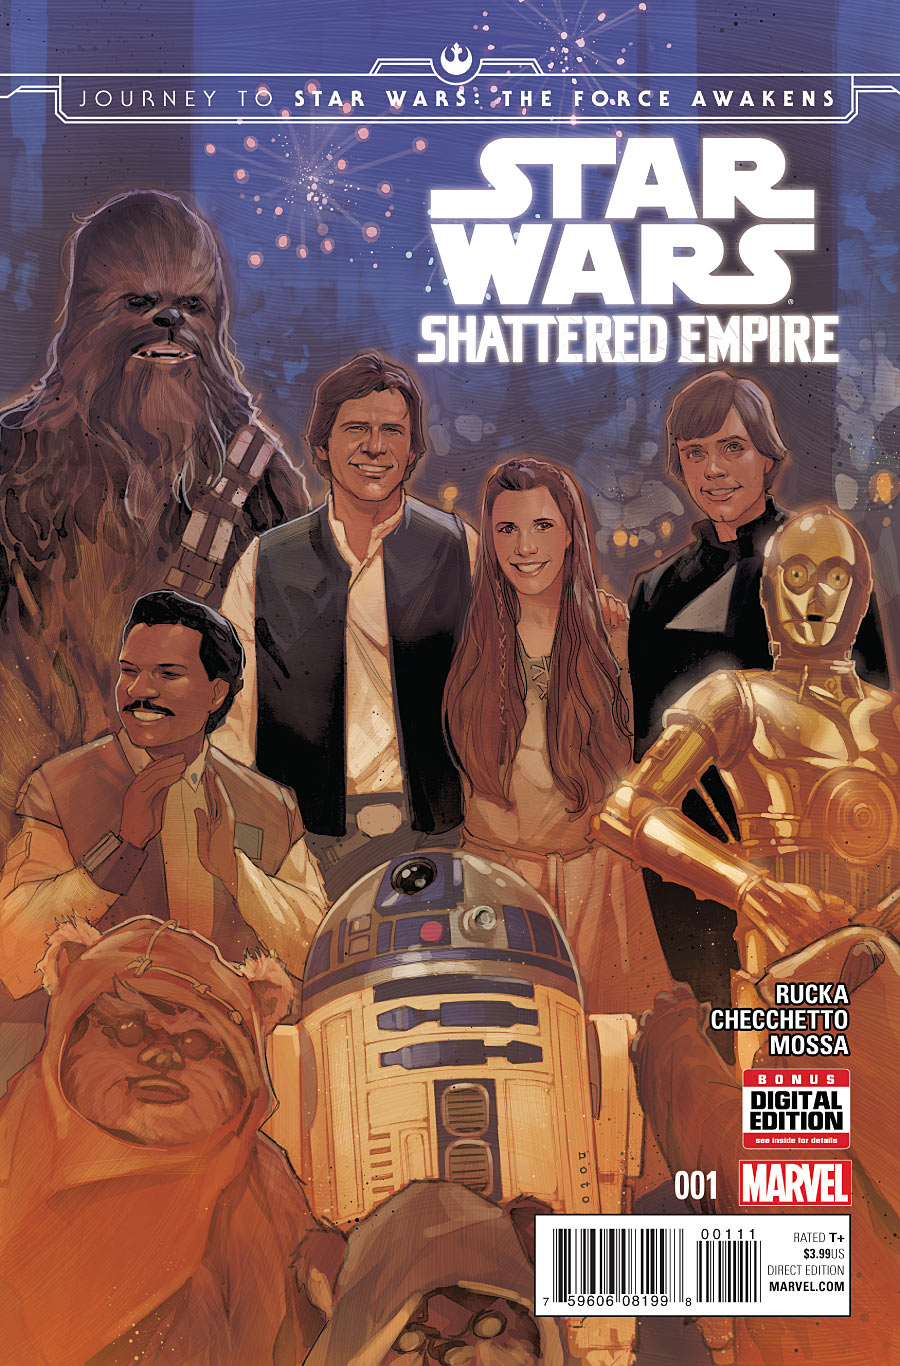 Journey_to_Star_Wars_The_Force_Awakens_-_Shattered_Empire_Vol_1_1 marvel.com